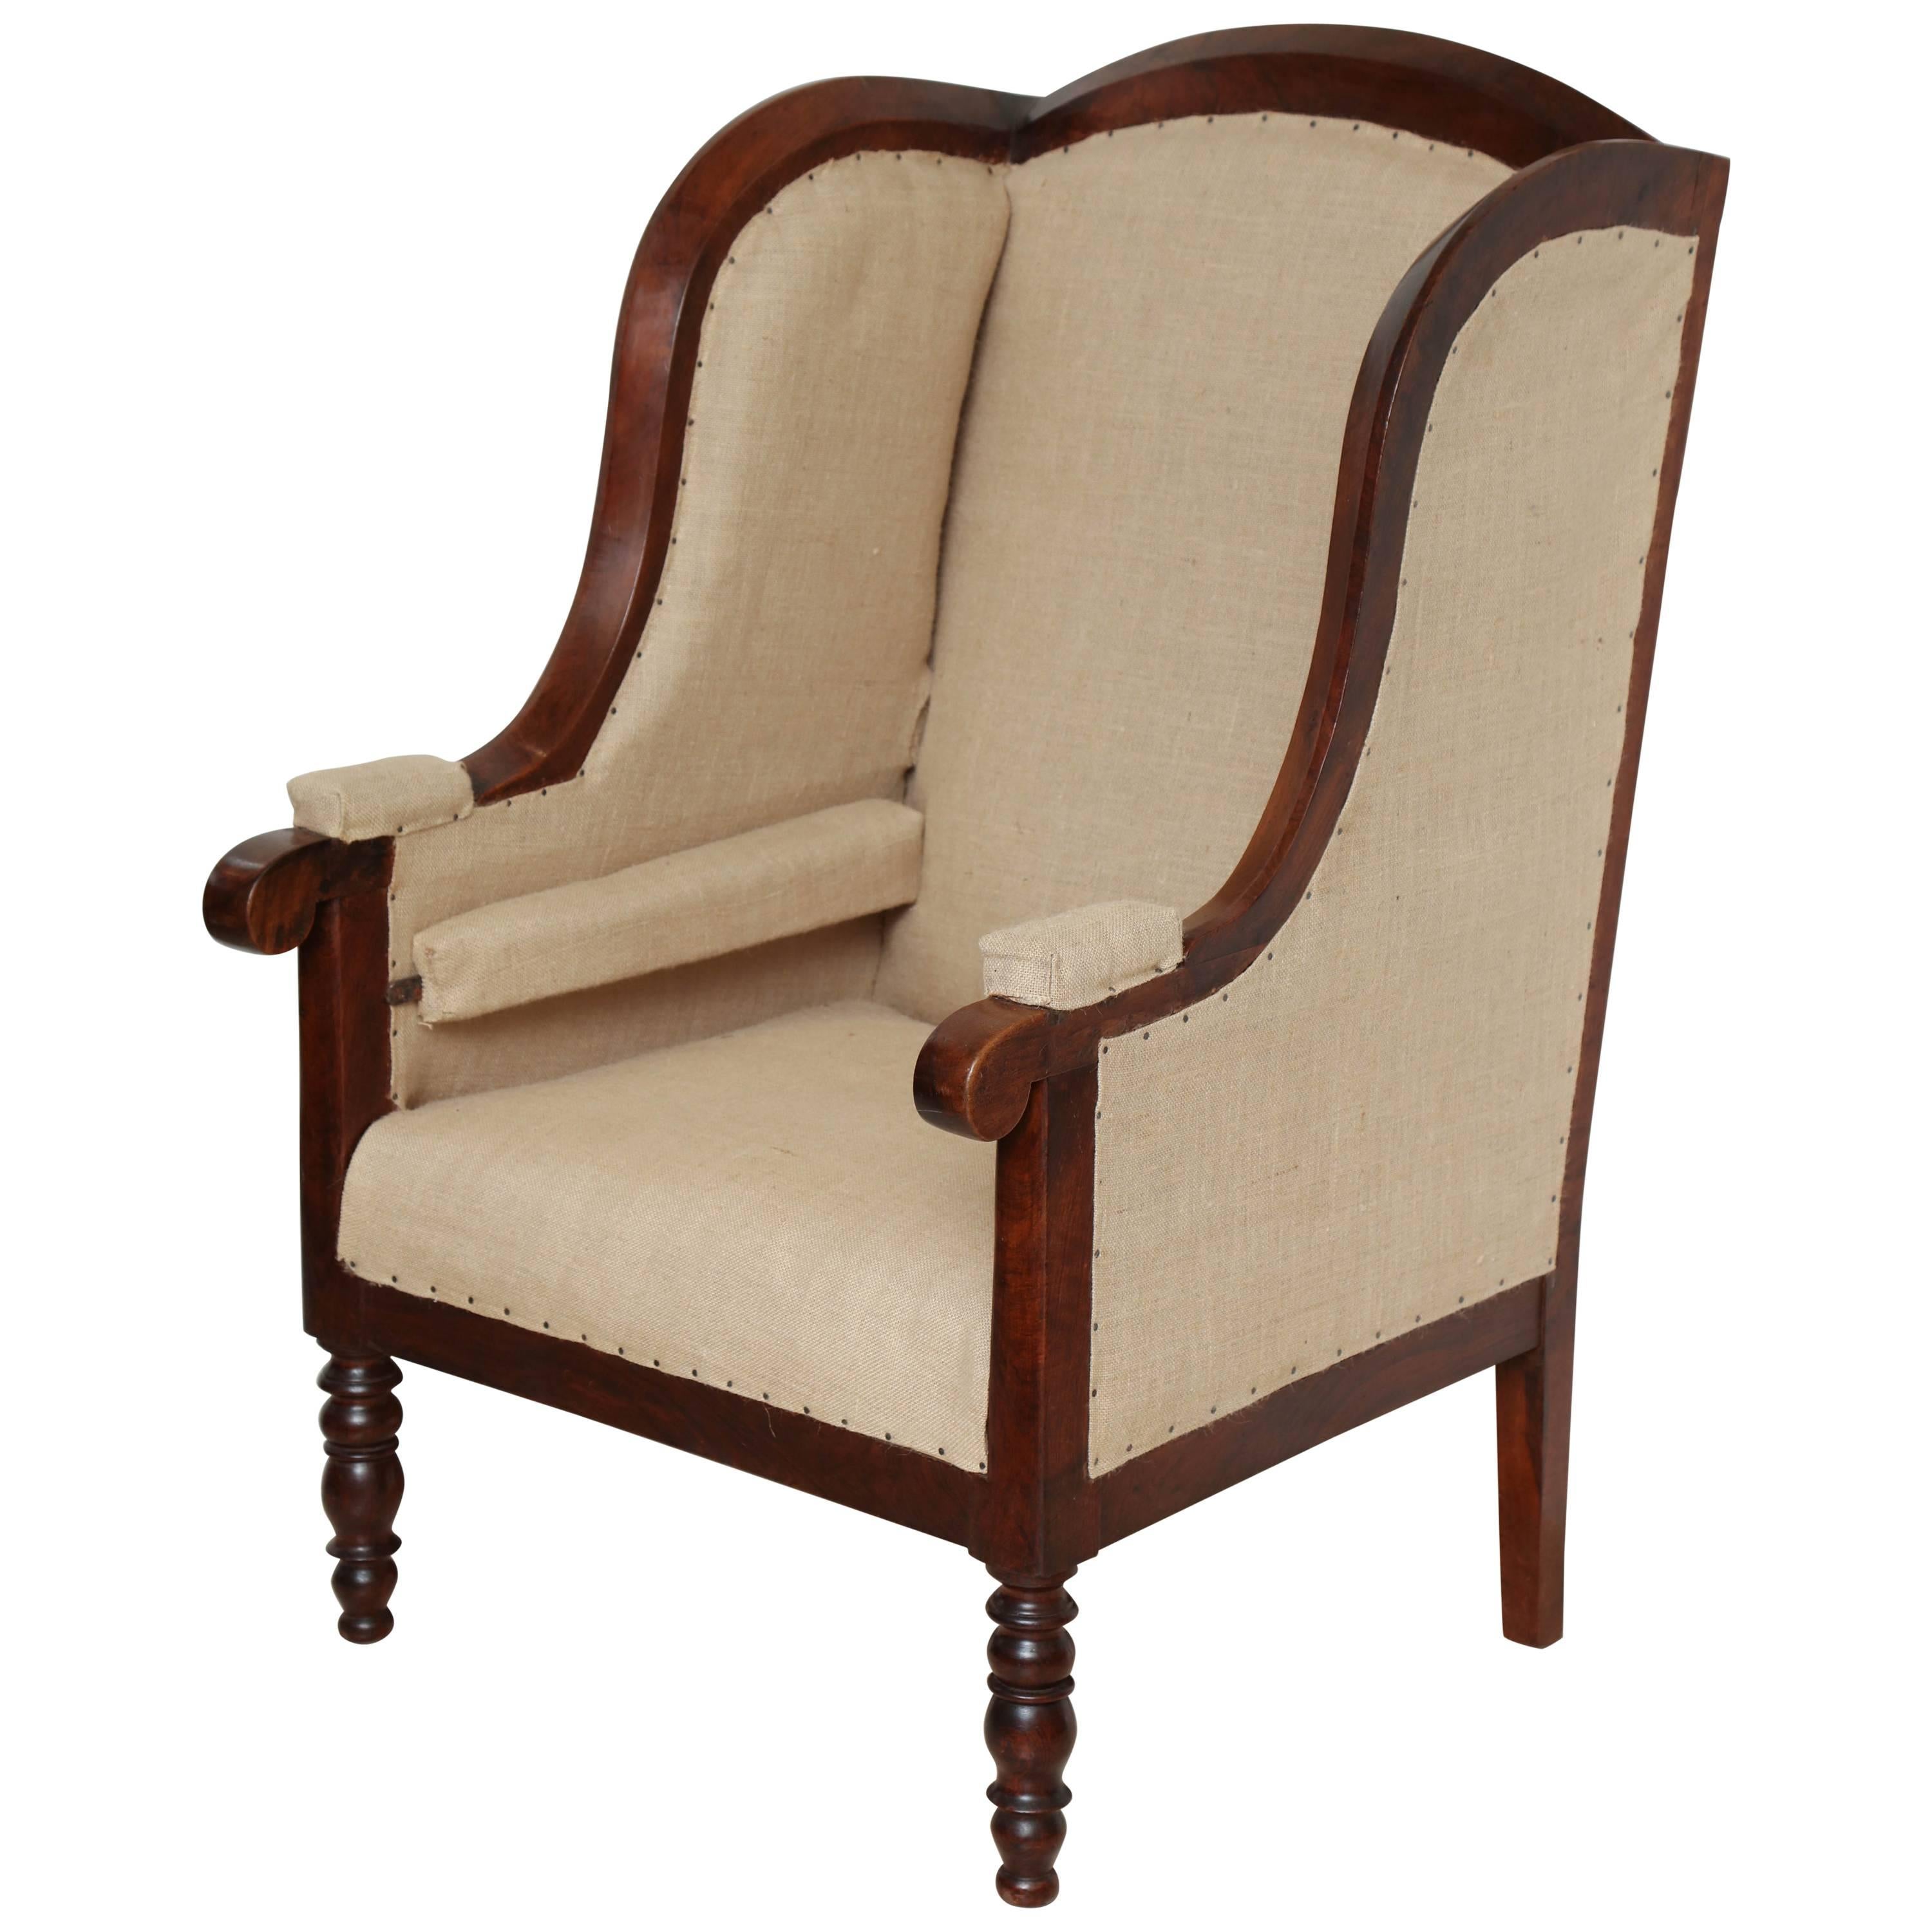 Early 19th Century French Walnut Upholstered Wing Chair For Sale